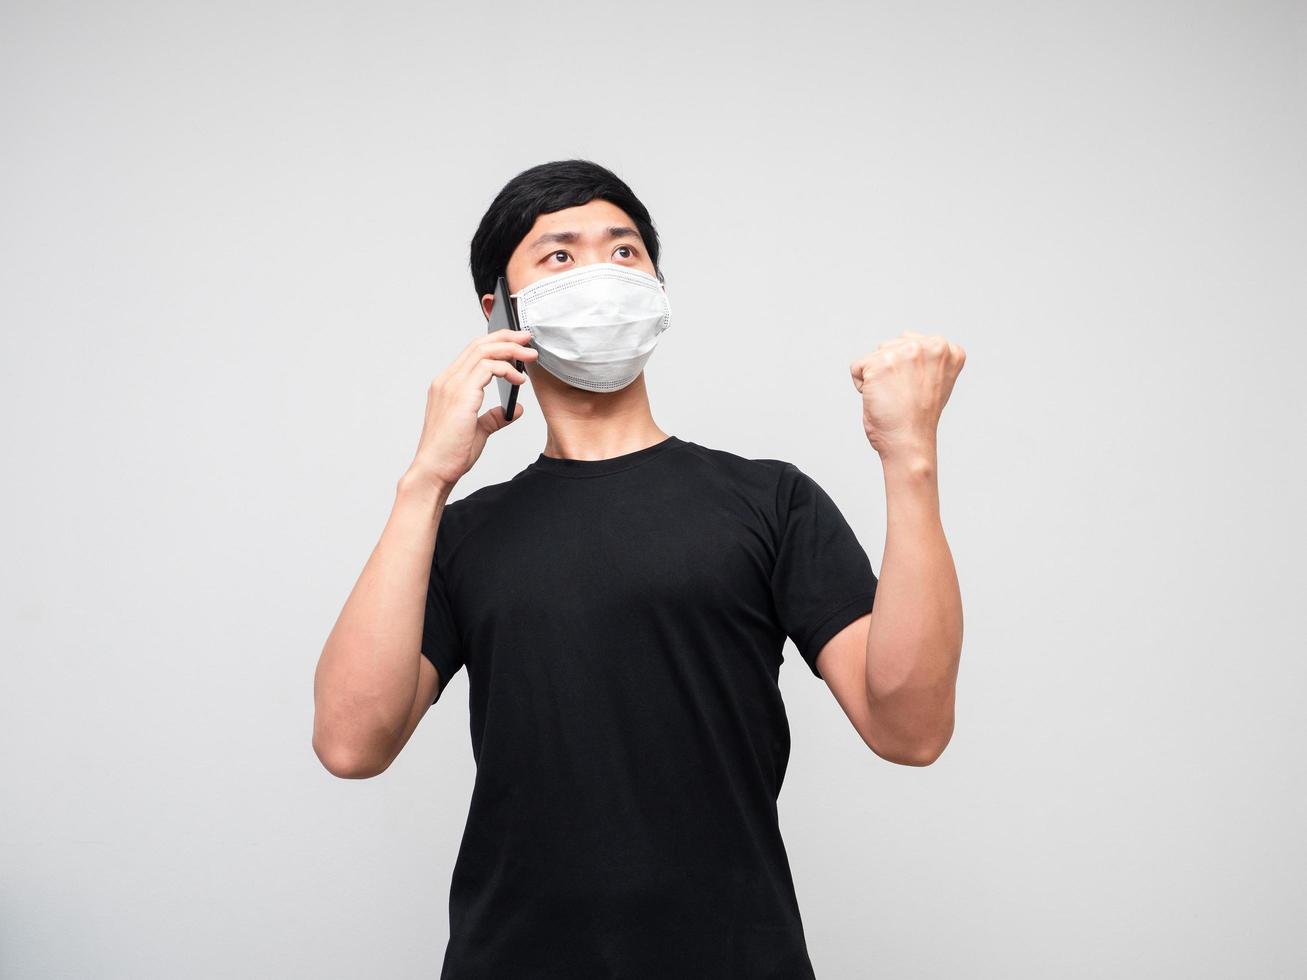 MAn wearing protect mask get good news with monie phone and shiw fist up white background photo